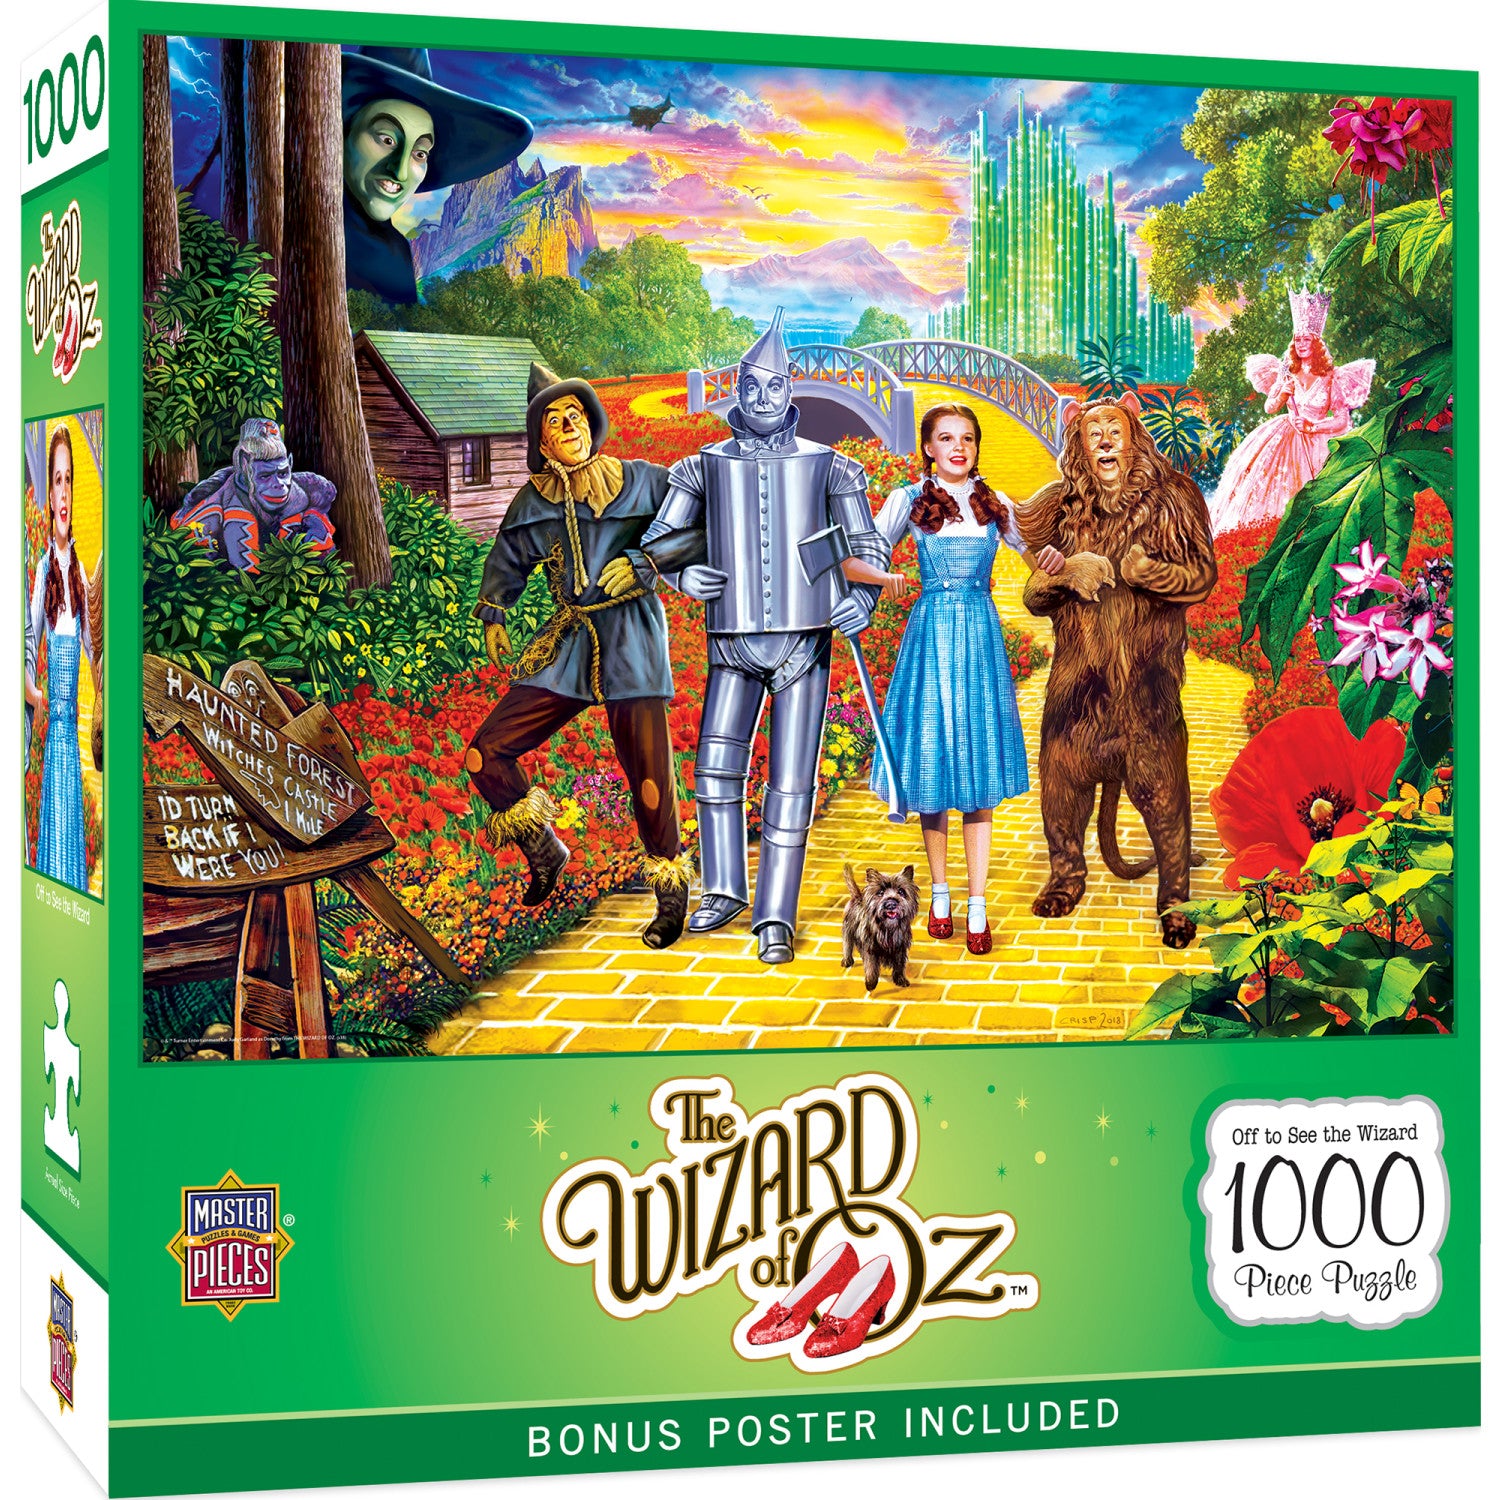 The Wizard of Oz - Off to See the Wizard 1000 Piece Jigsaw Puzzle